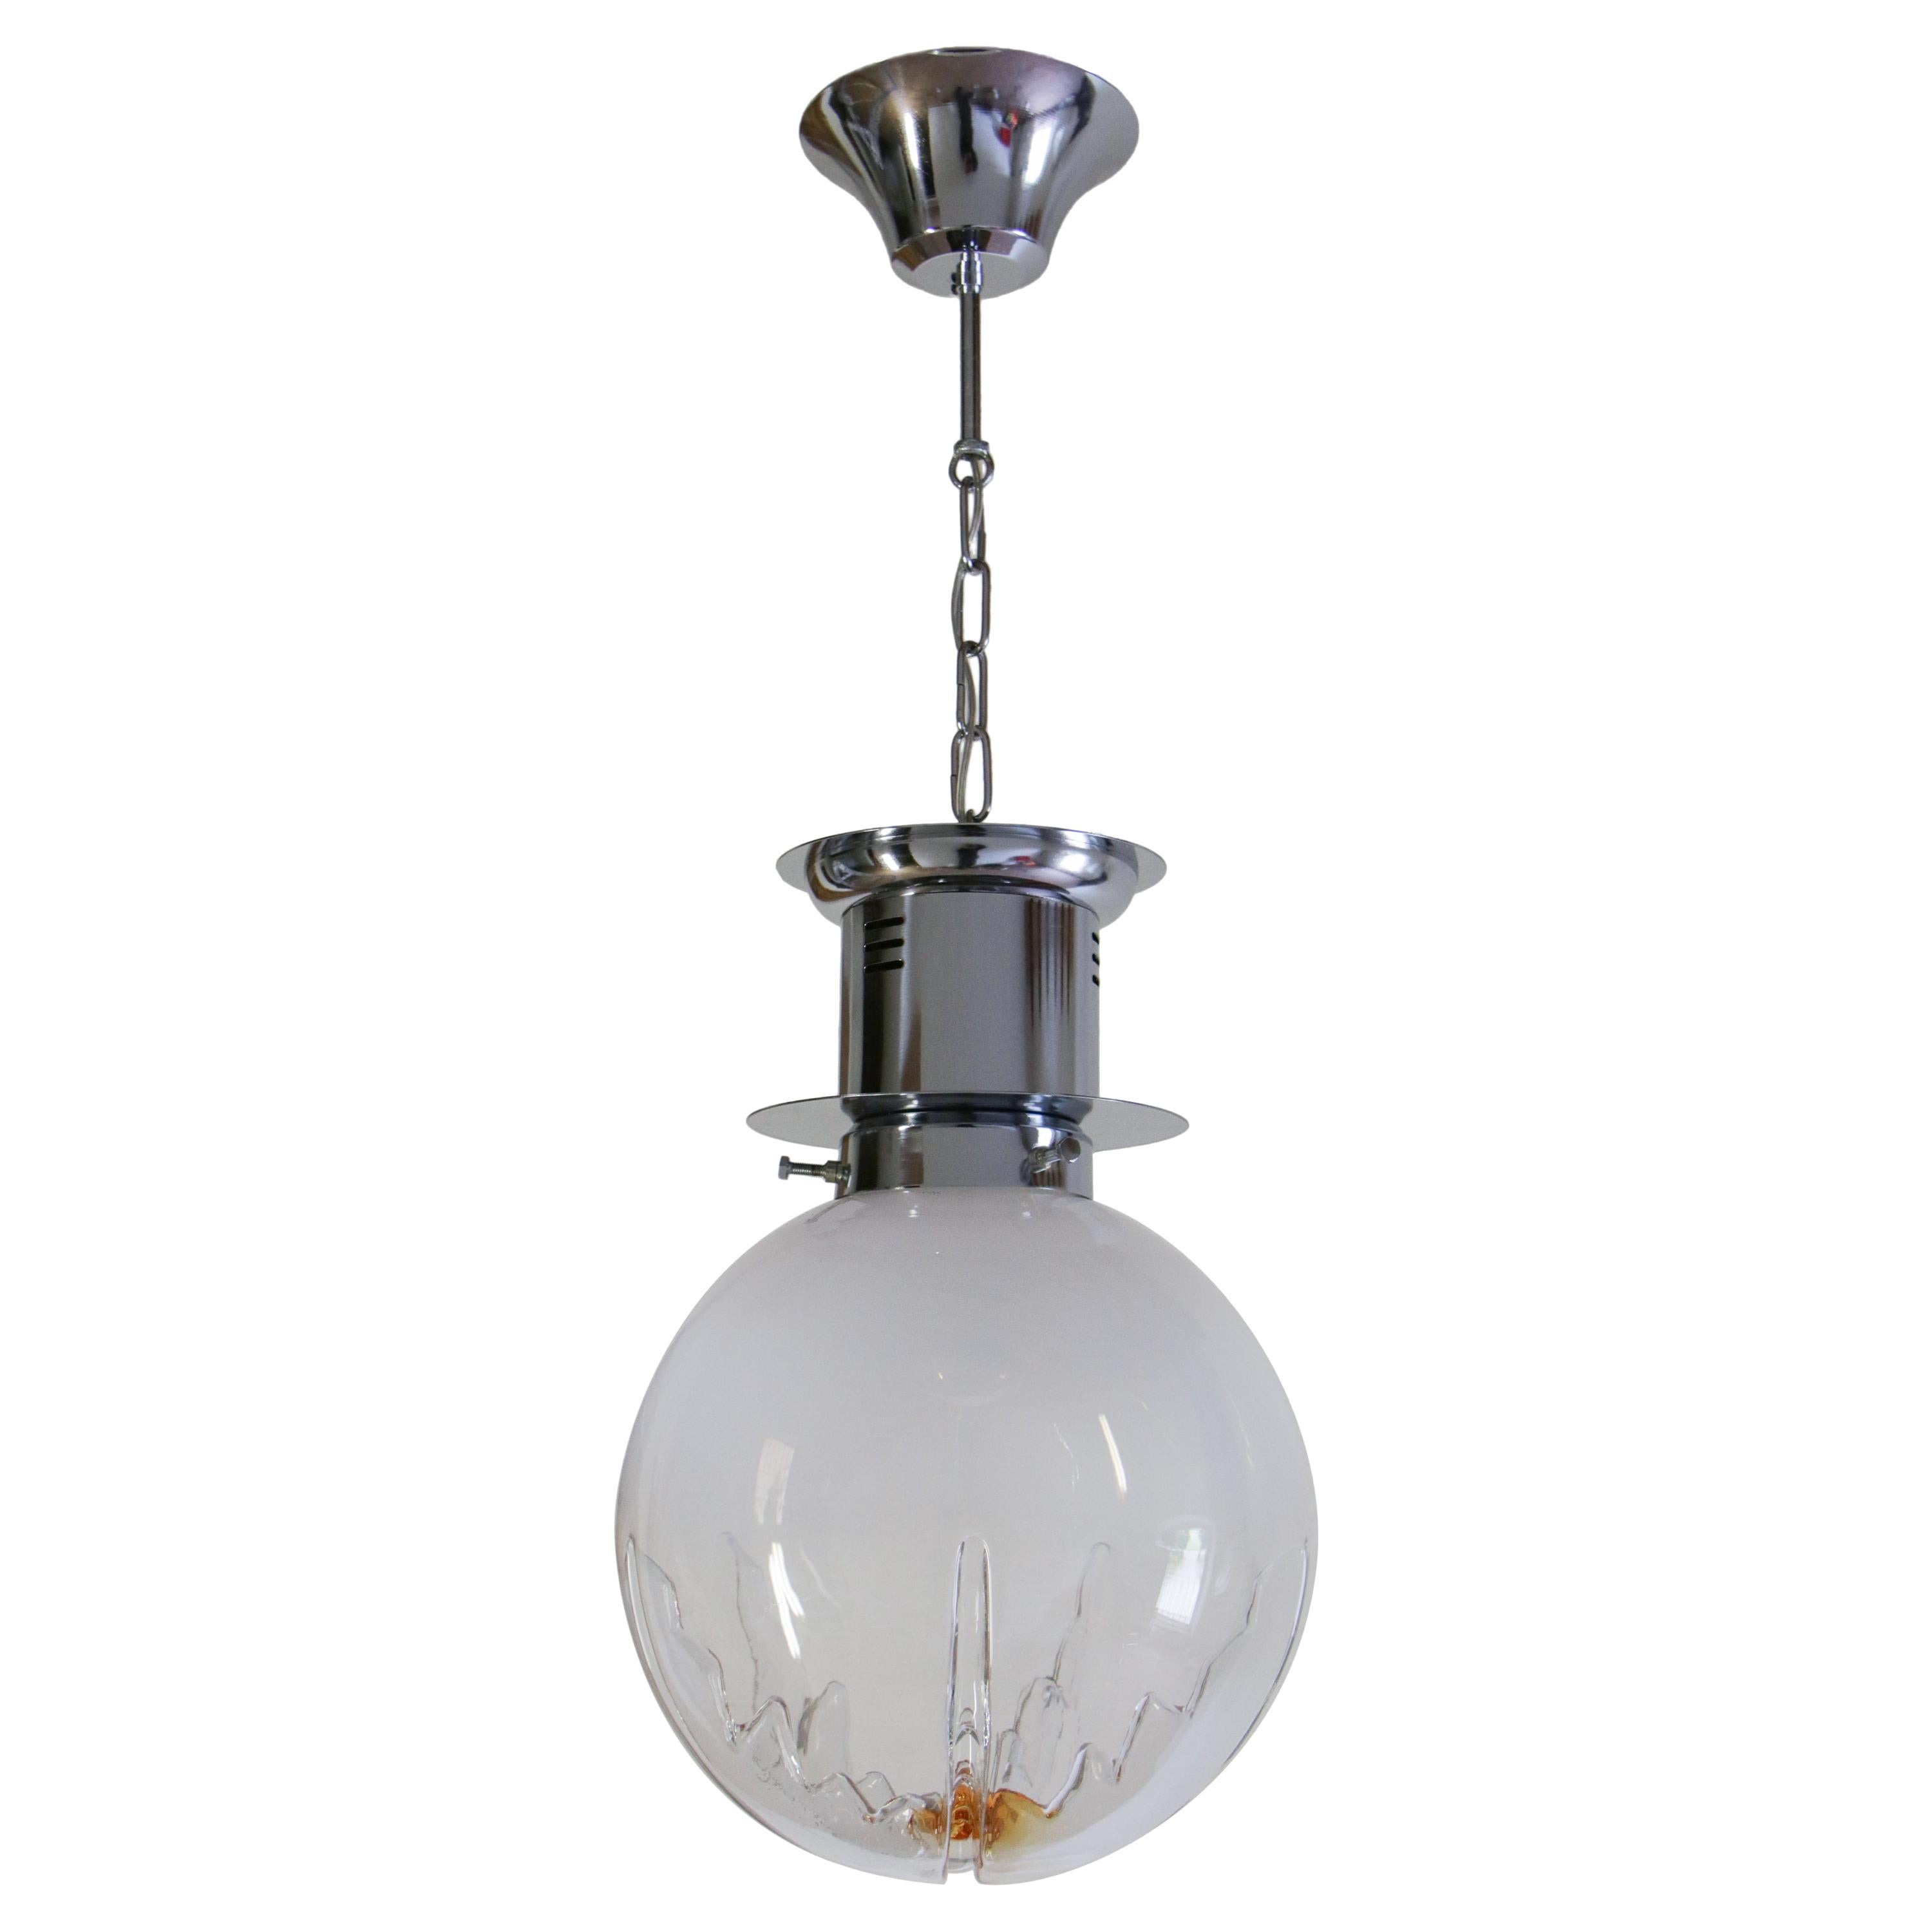 Italian Space Age ball pendant ceiling lamp in smoked glass with a touch of orange, attributed to Mezzega, from the 1970s. The structure and the pendant chain are in chromium steel. The blown smoked glass, apparently, is divided into six parts. A